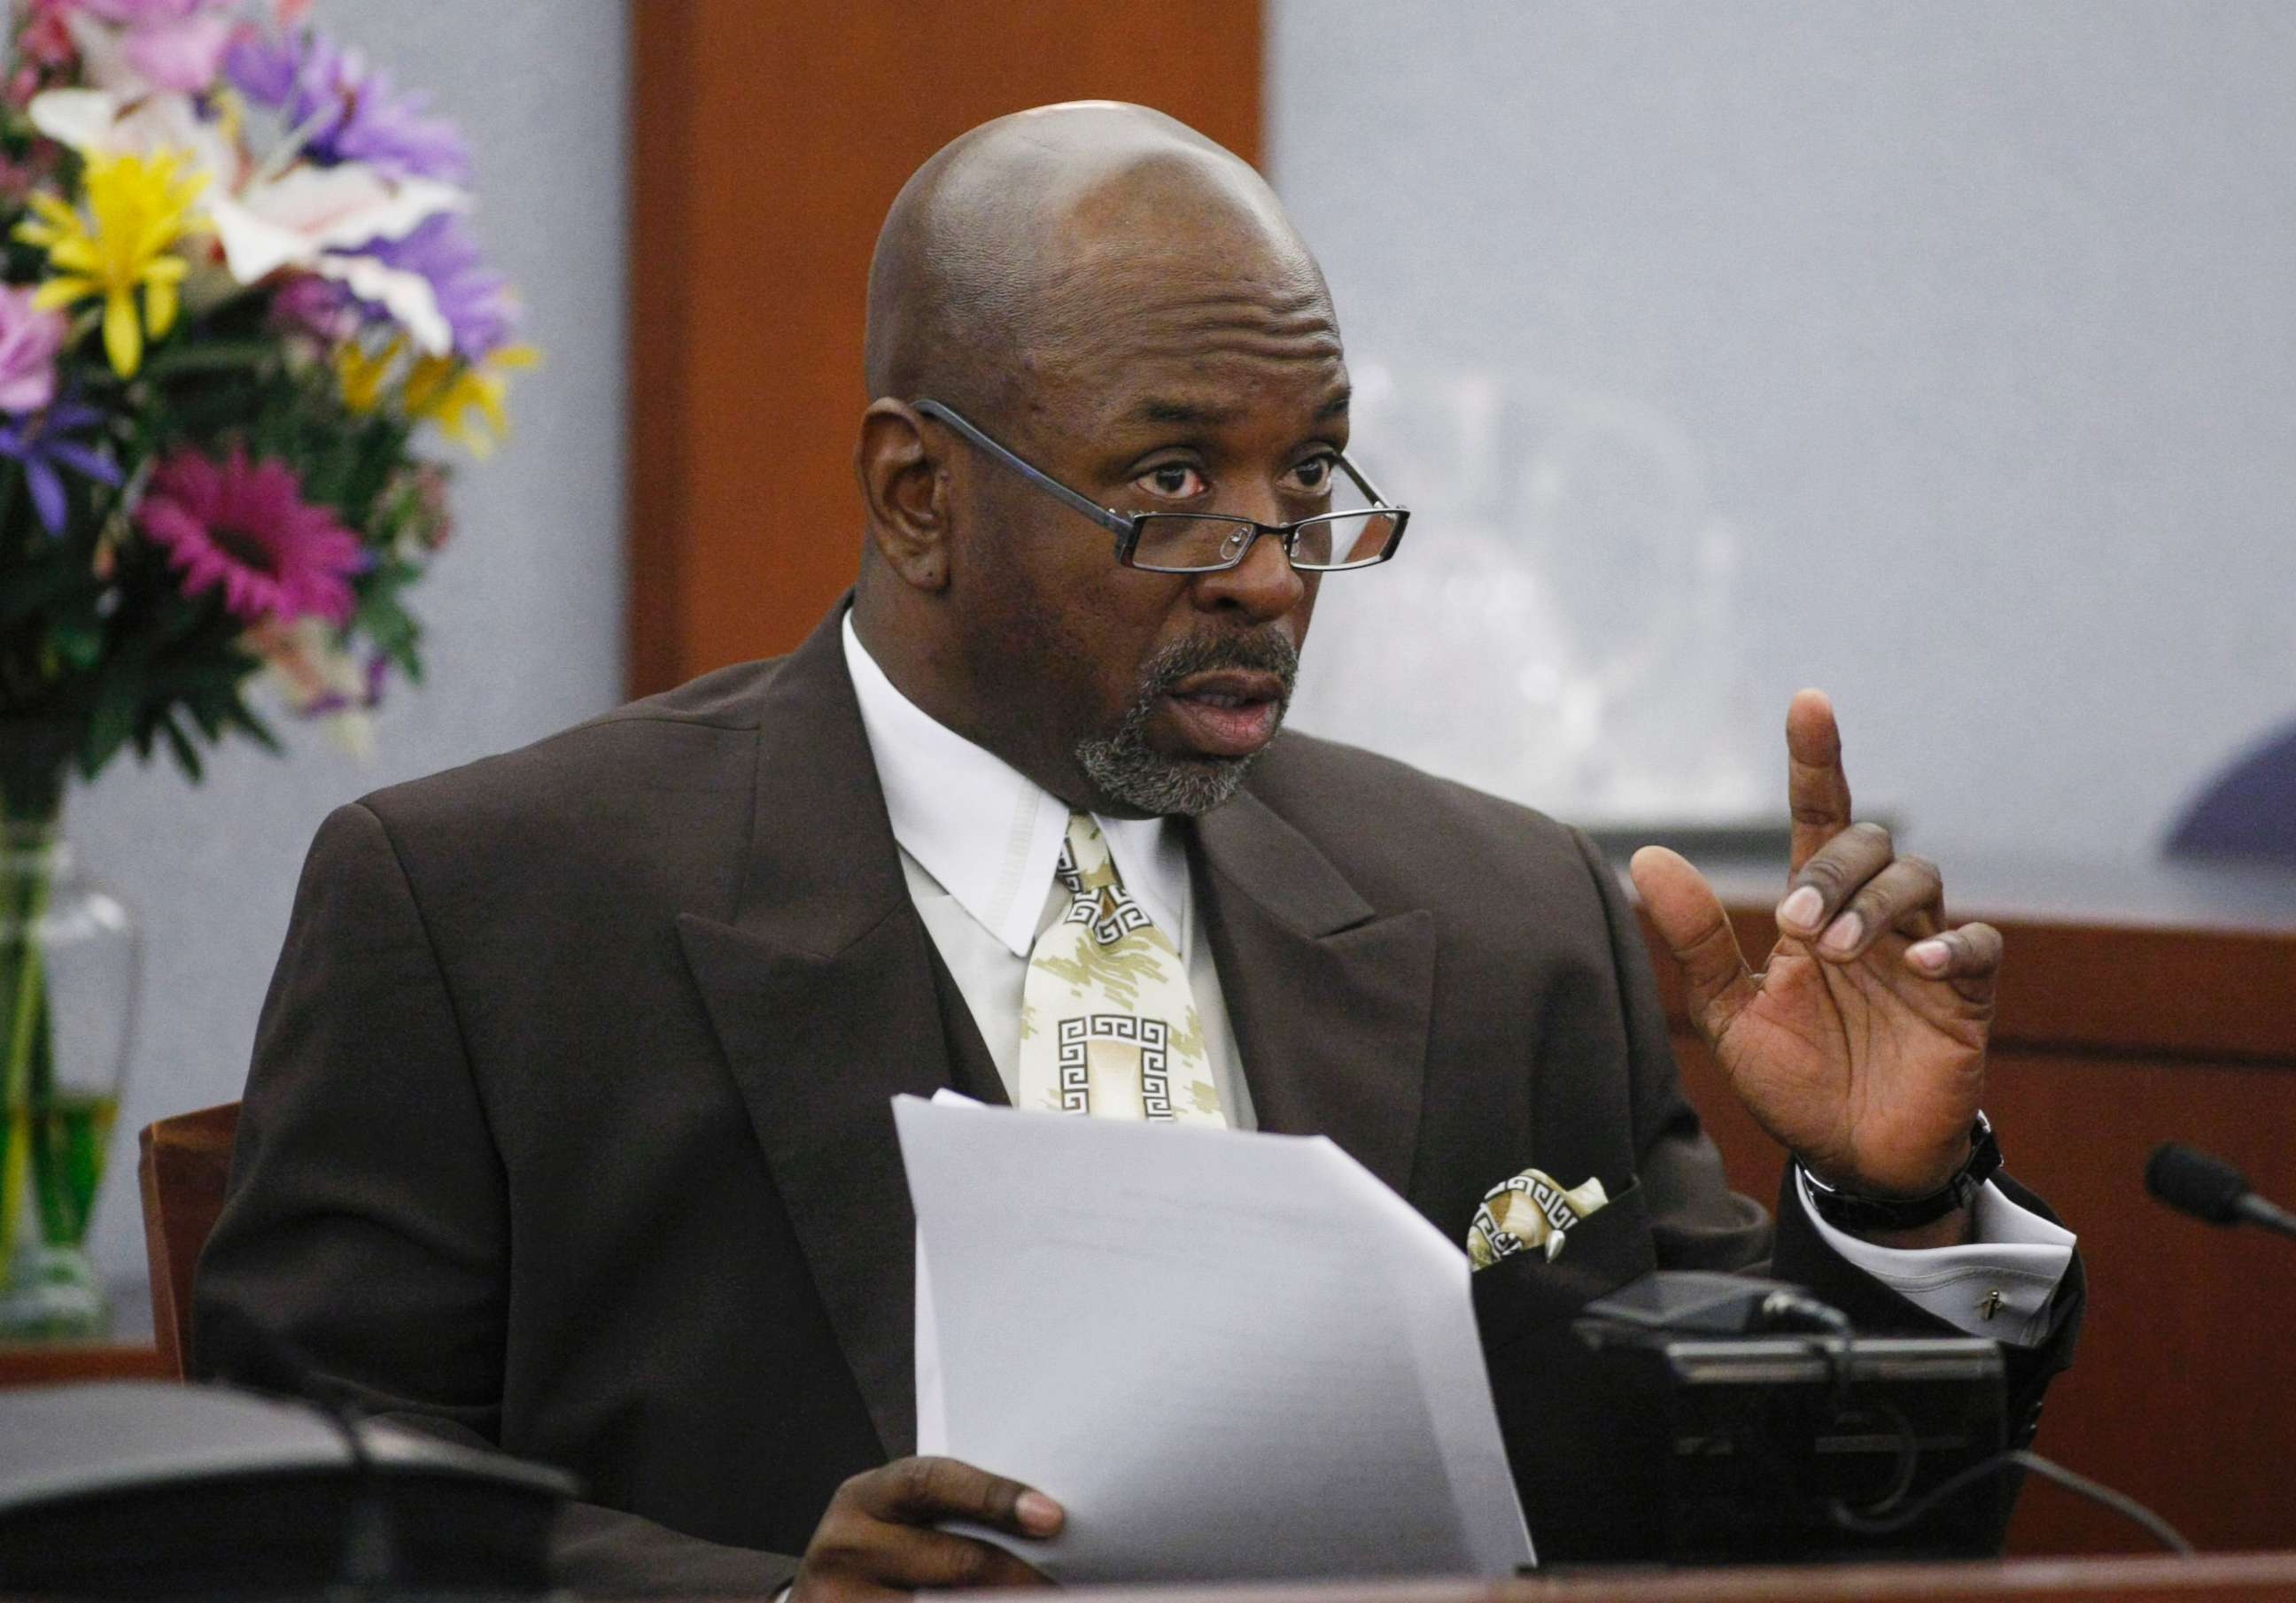 PHOTO: Prosecution witness Michael McClinton testifies during the O.J. Simpson's trial at the Clark County Regional Justice Center, Sept. 29, 2008, in Las Vegas, Nevada.